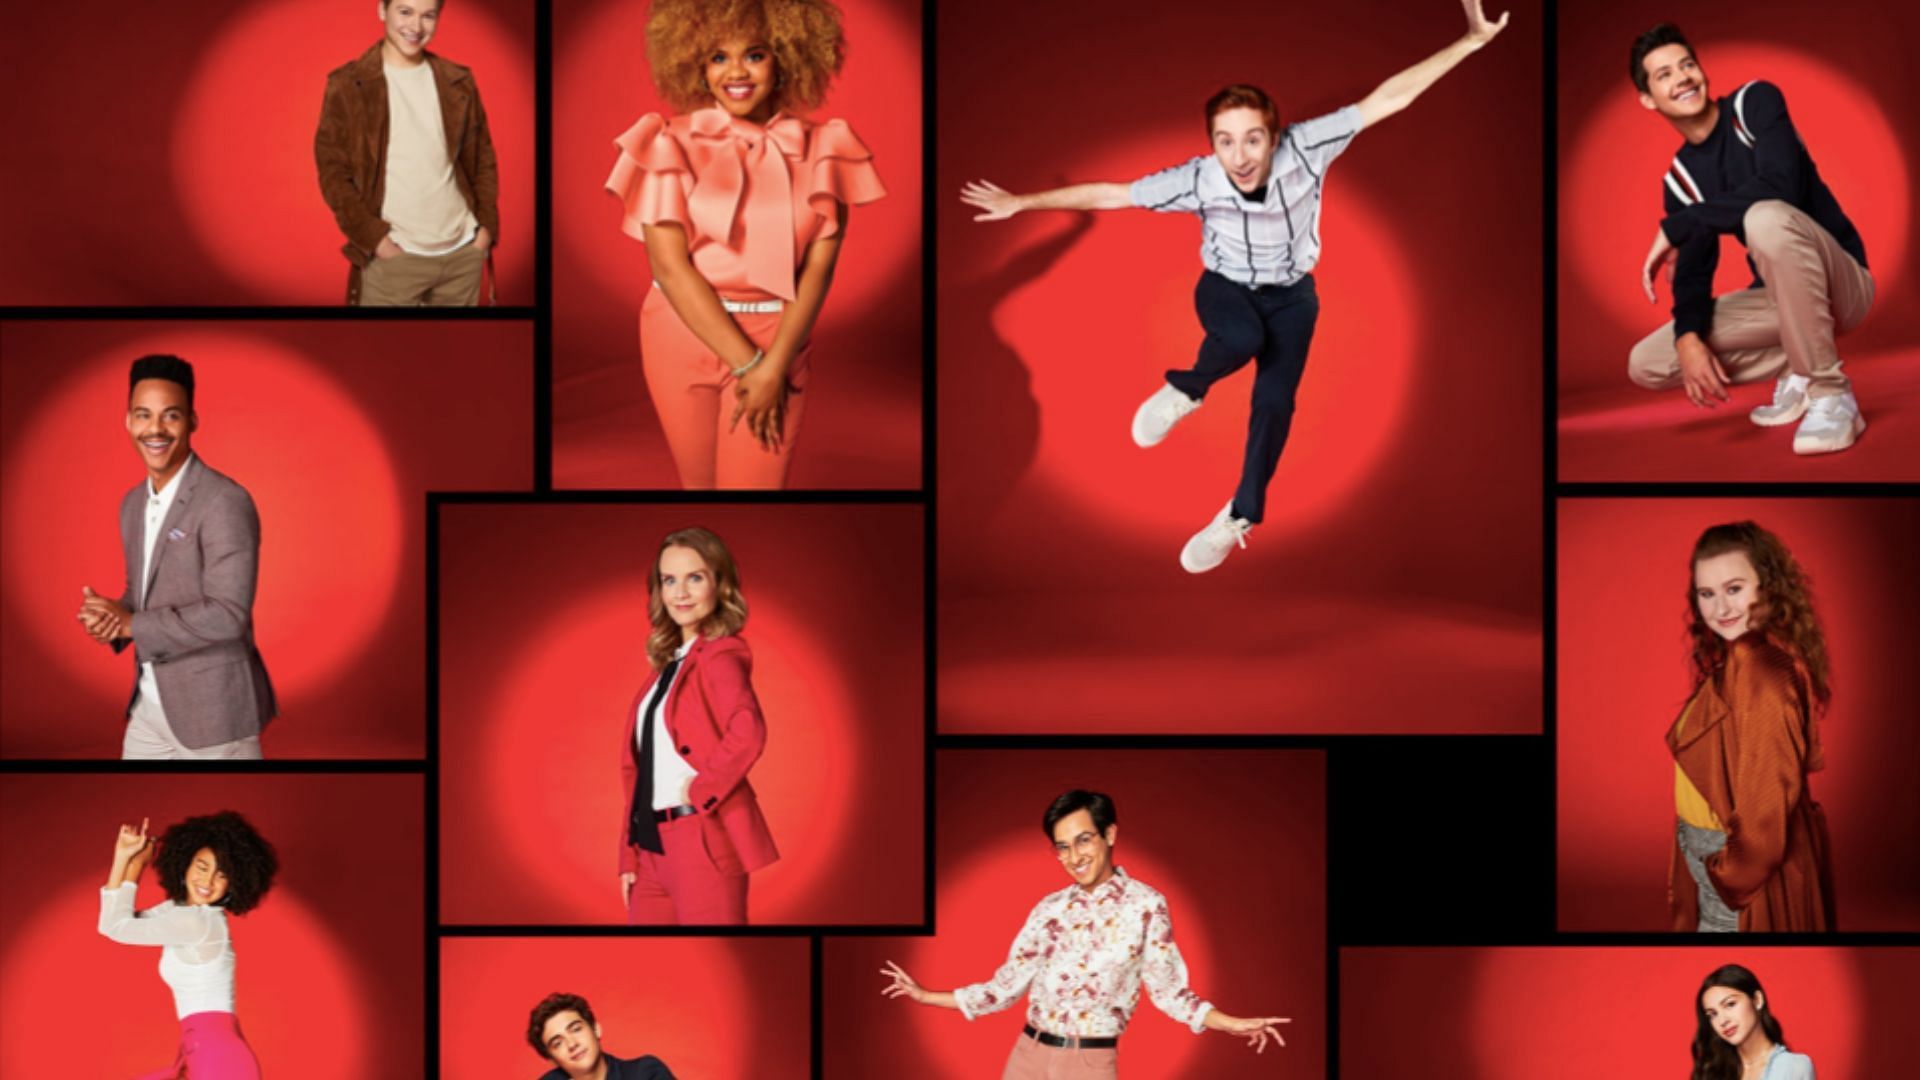 Cast of High School Musical: The Musical: The Series (Image via IMDb)